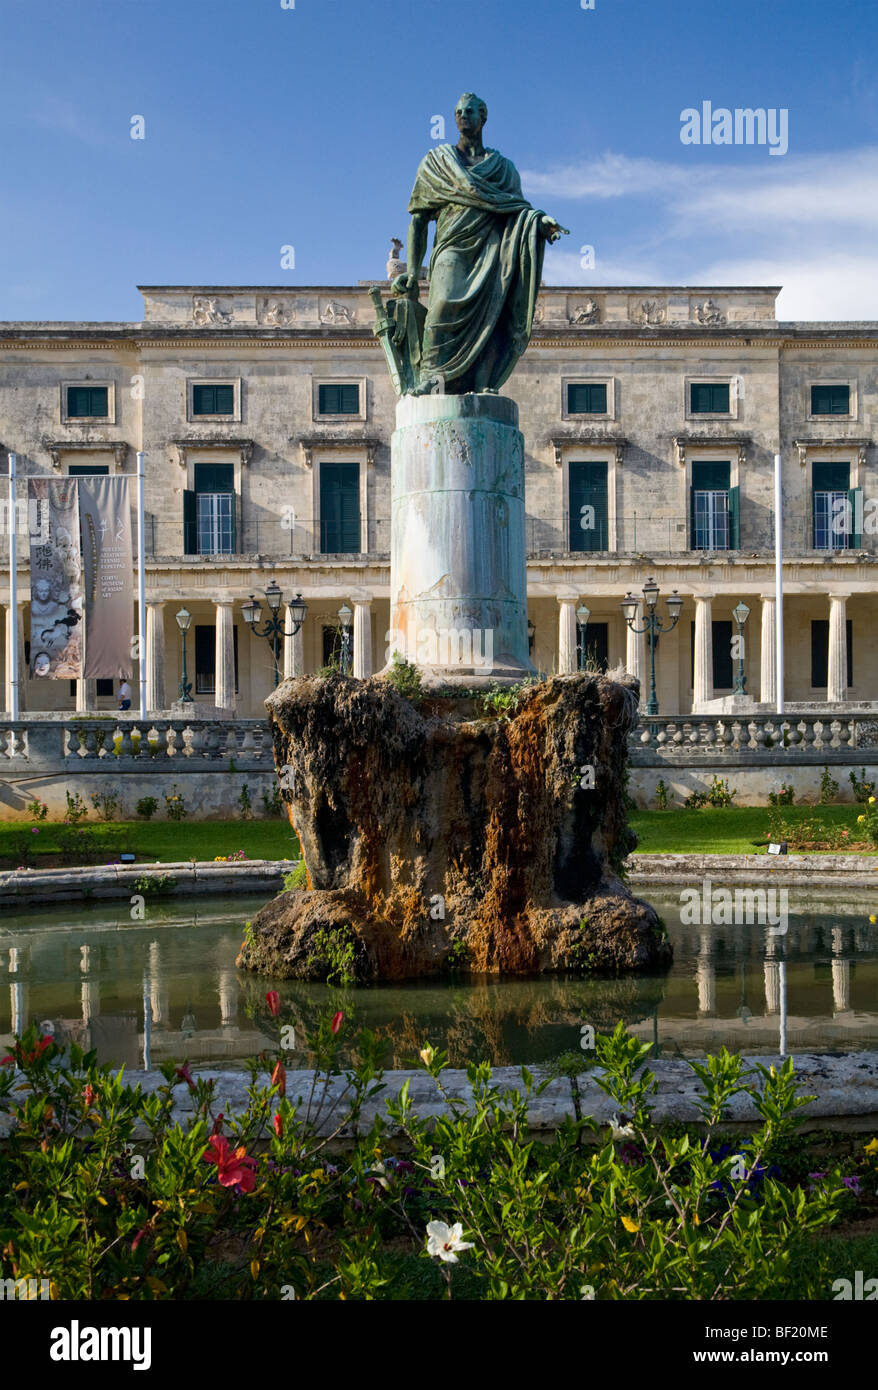 Statue of Frederick Adam in front of the Palace of St. Michael and St. George, Kerkyra (Corfu), Greece Stock Photo